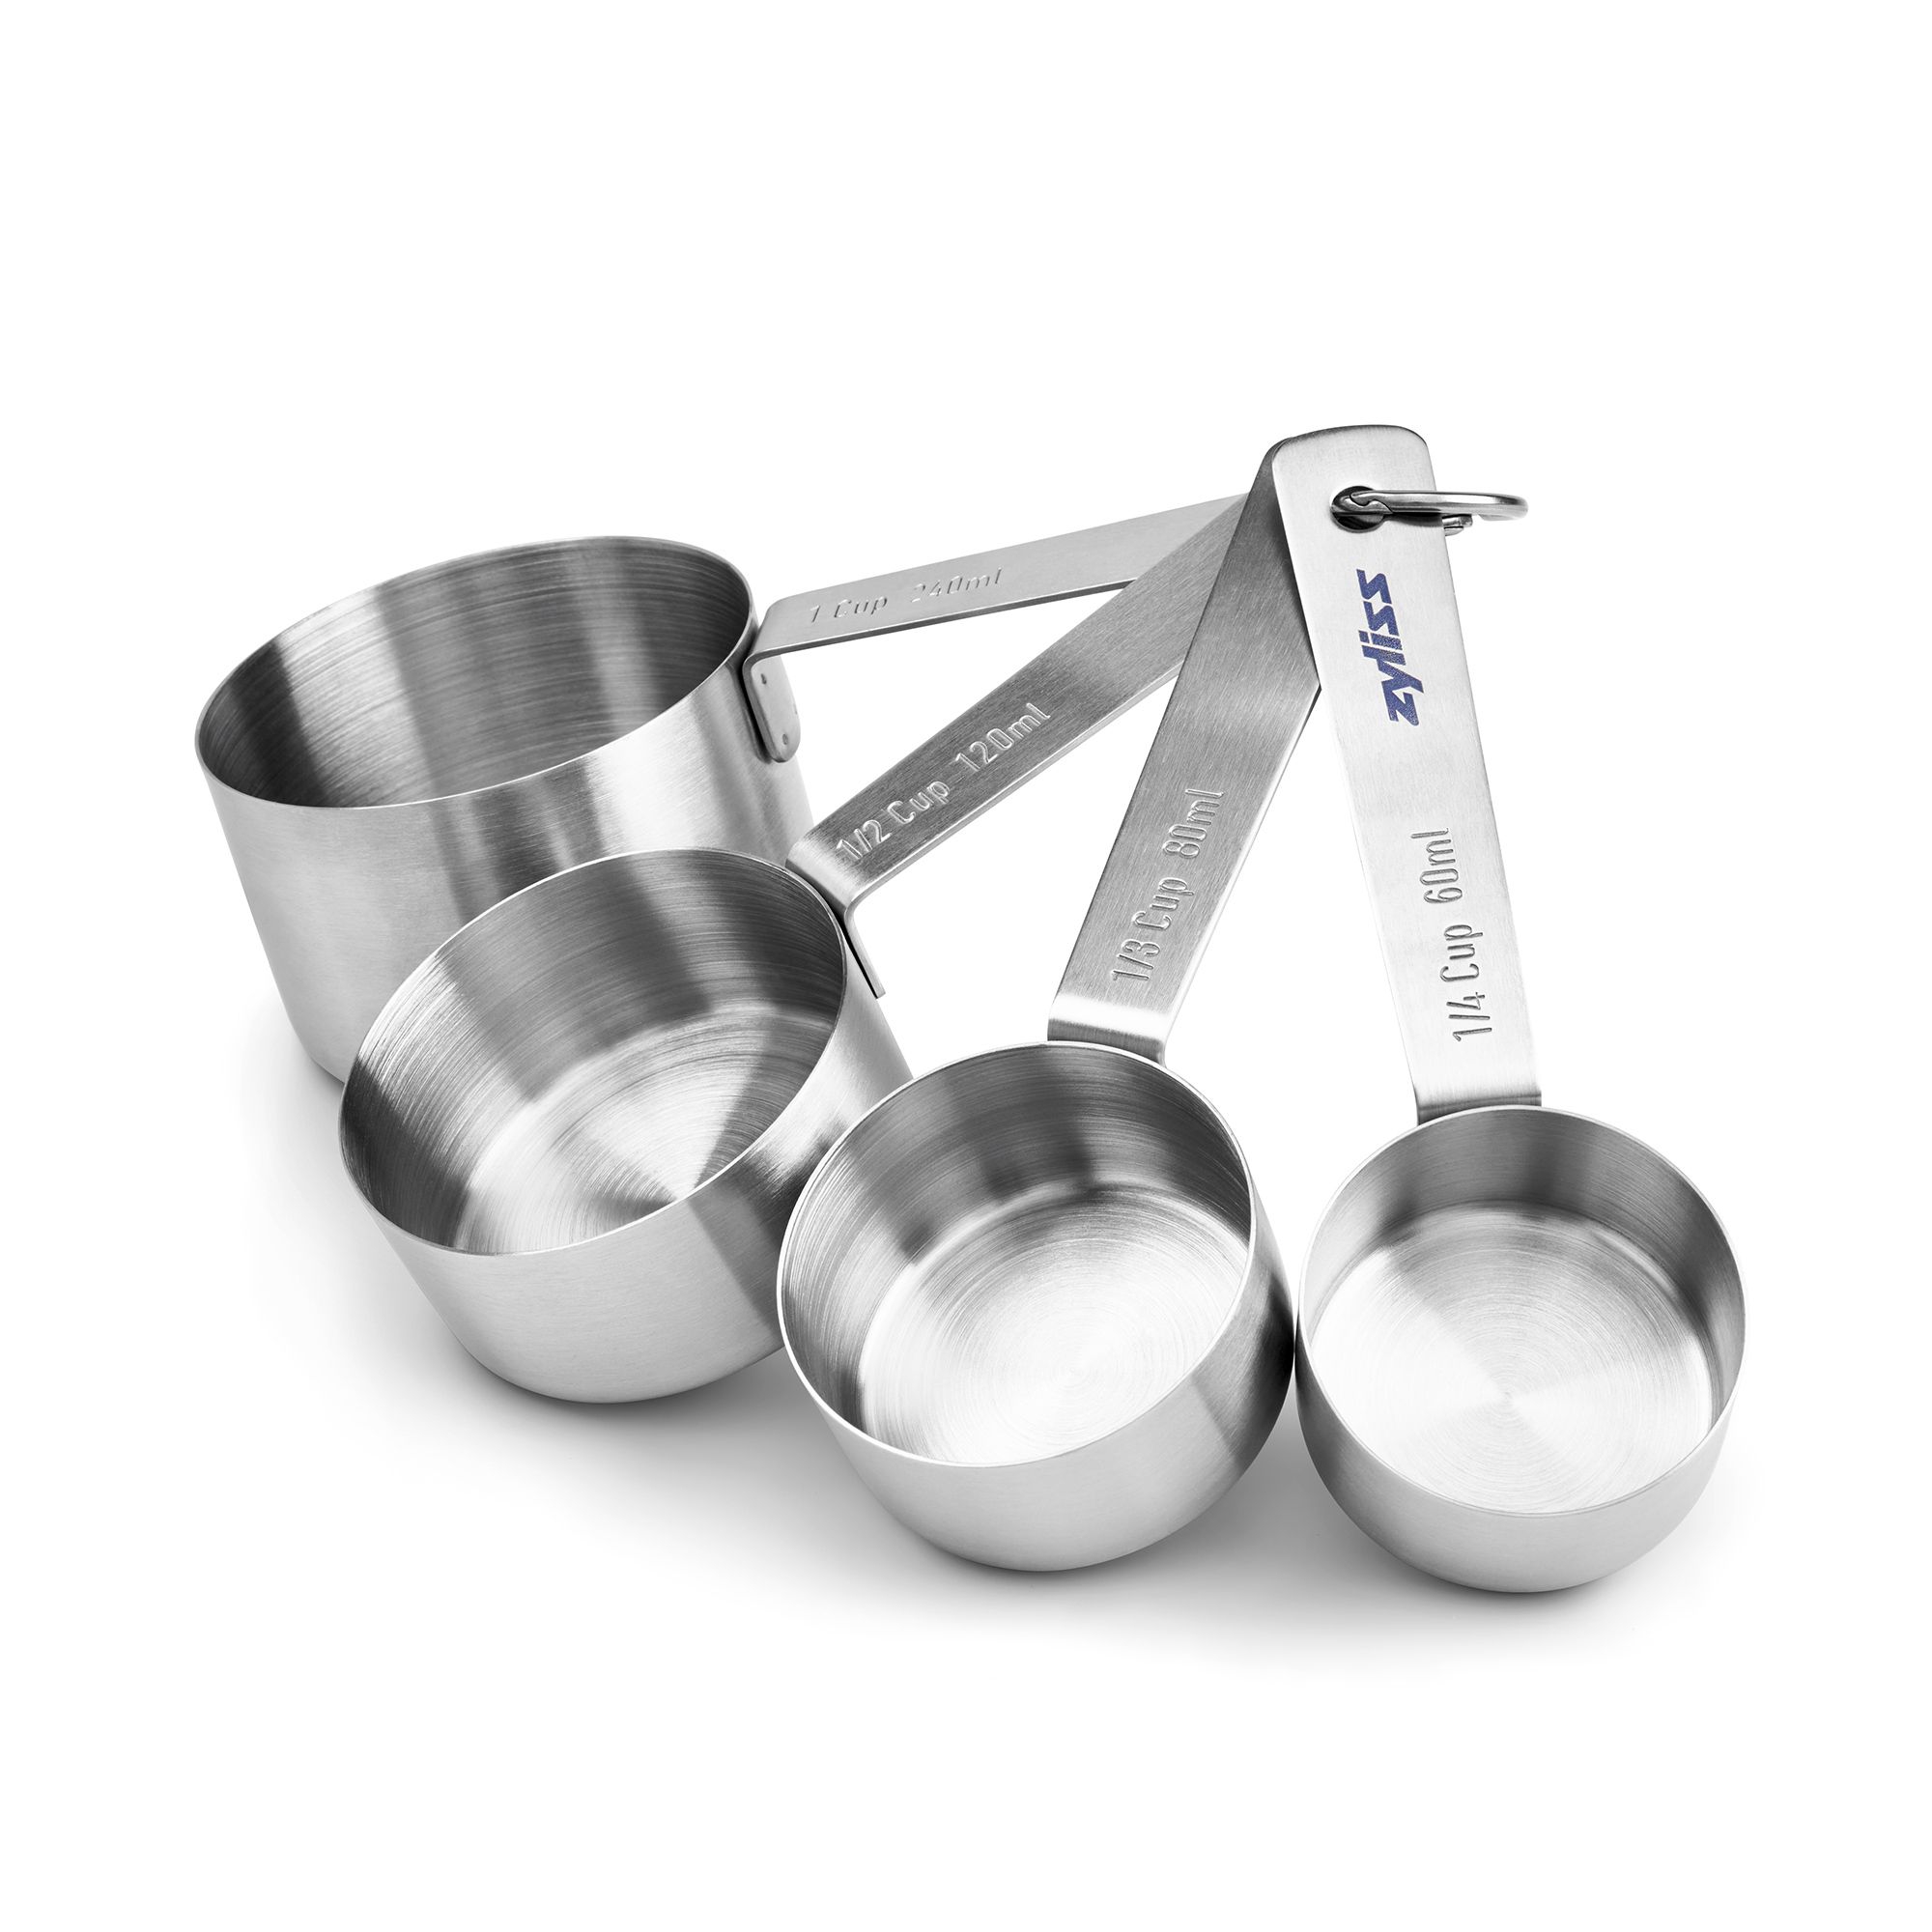 Zyliss - Measuring cup in 4 different sizes